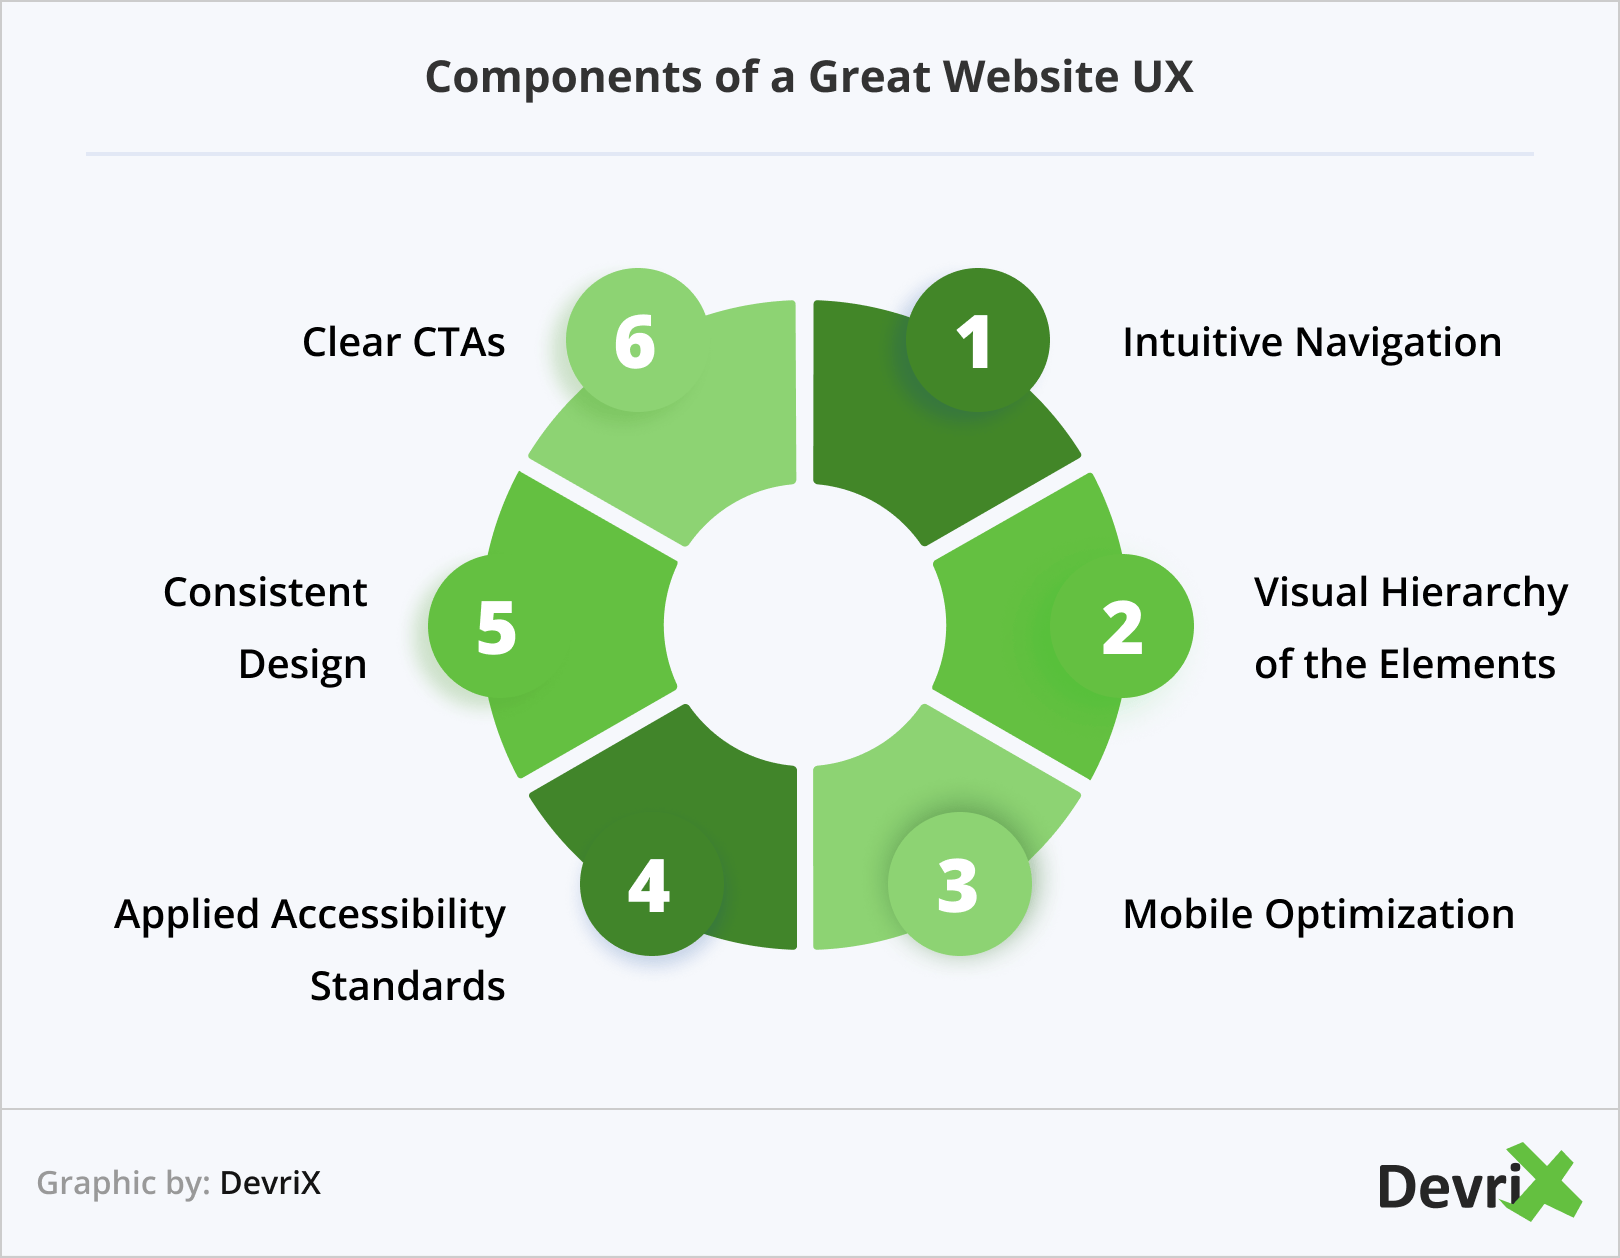 Components of a Great Website UX